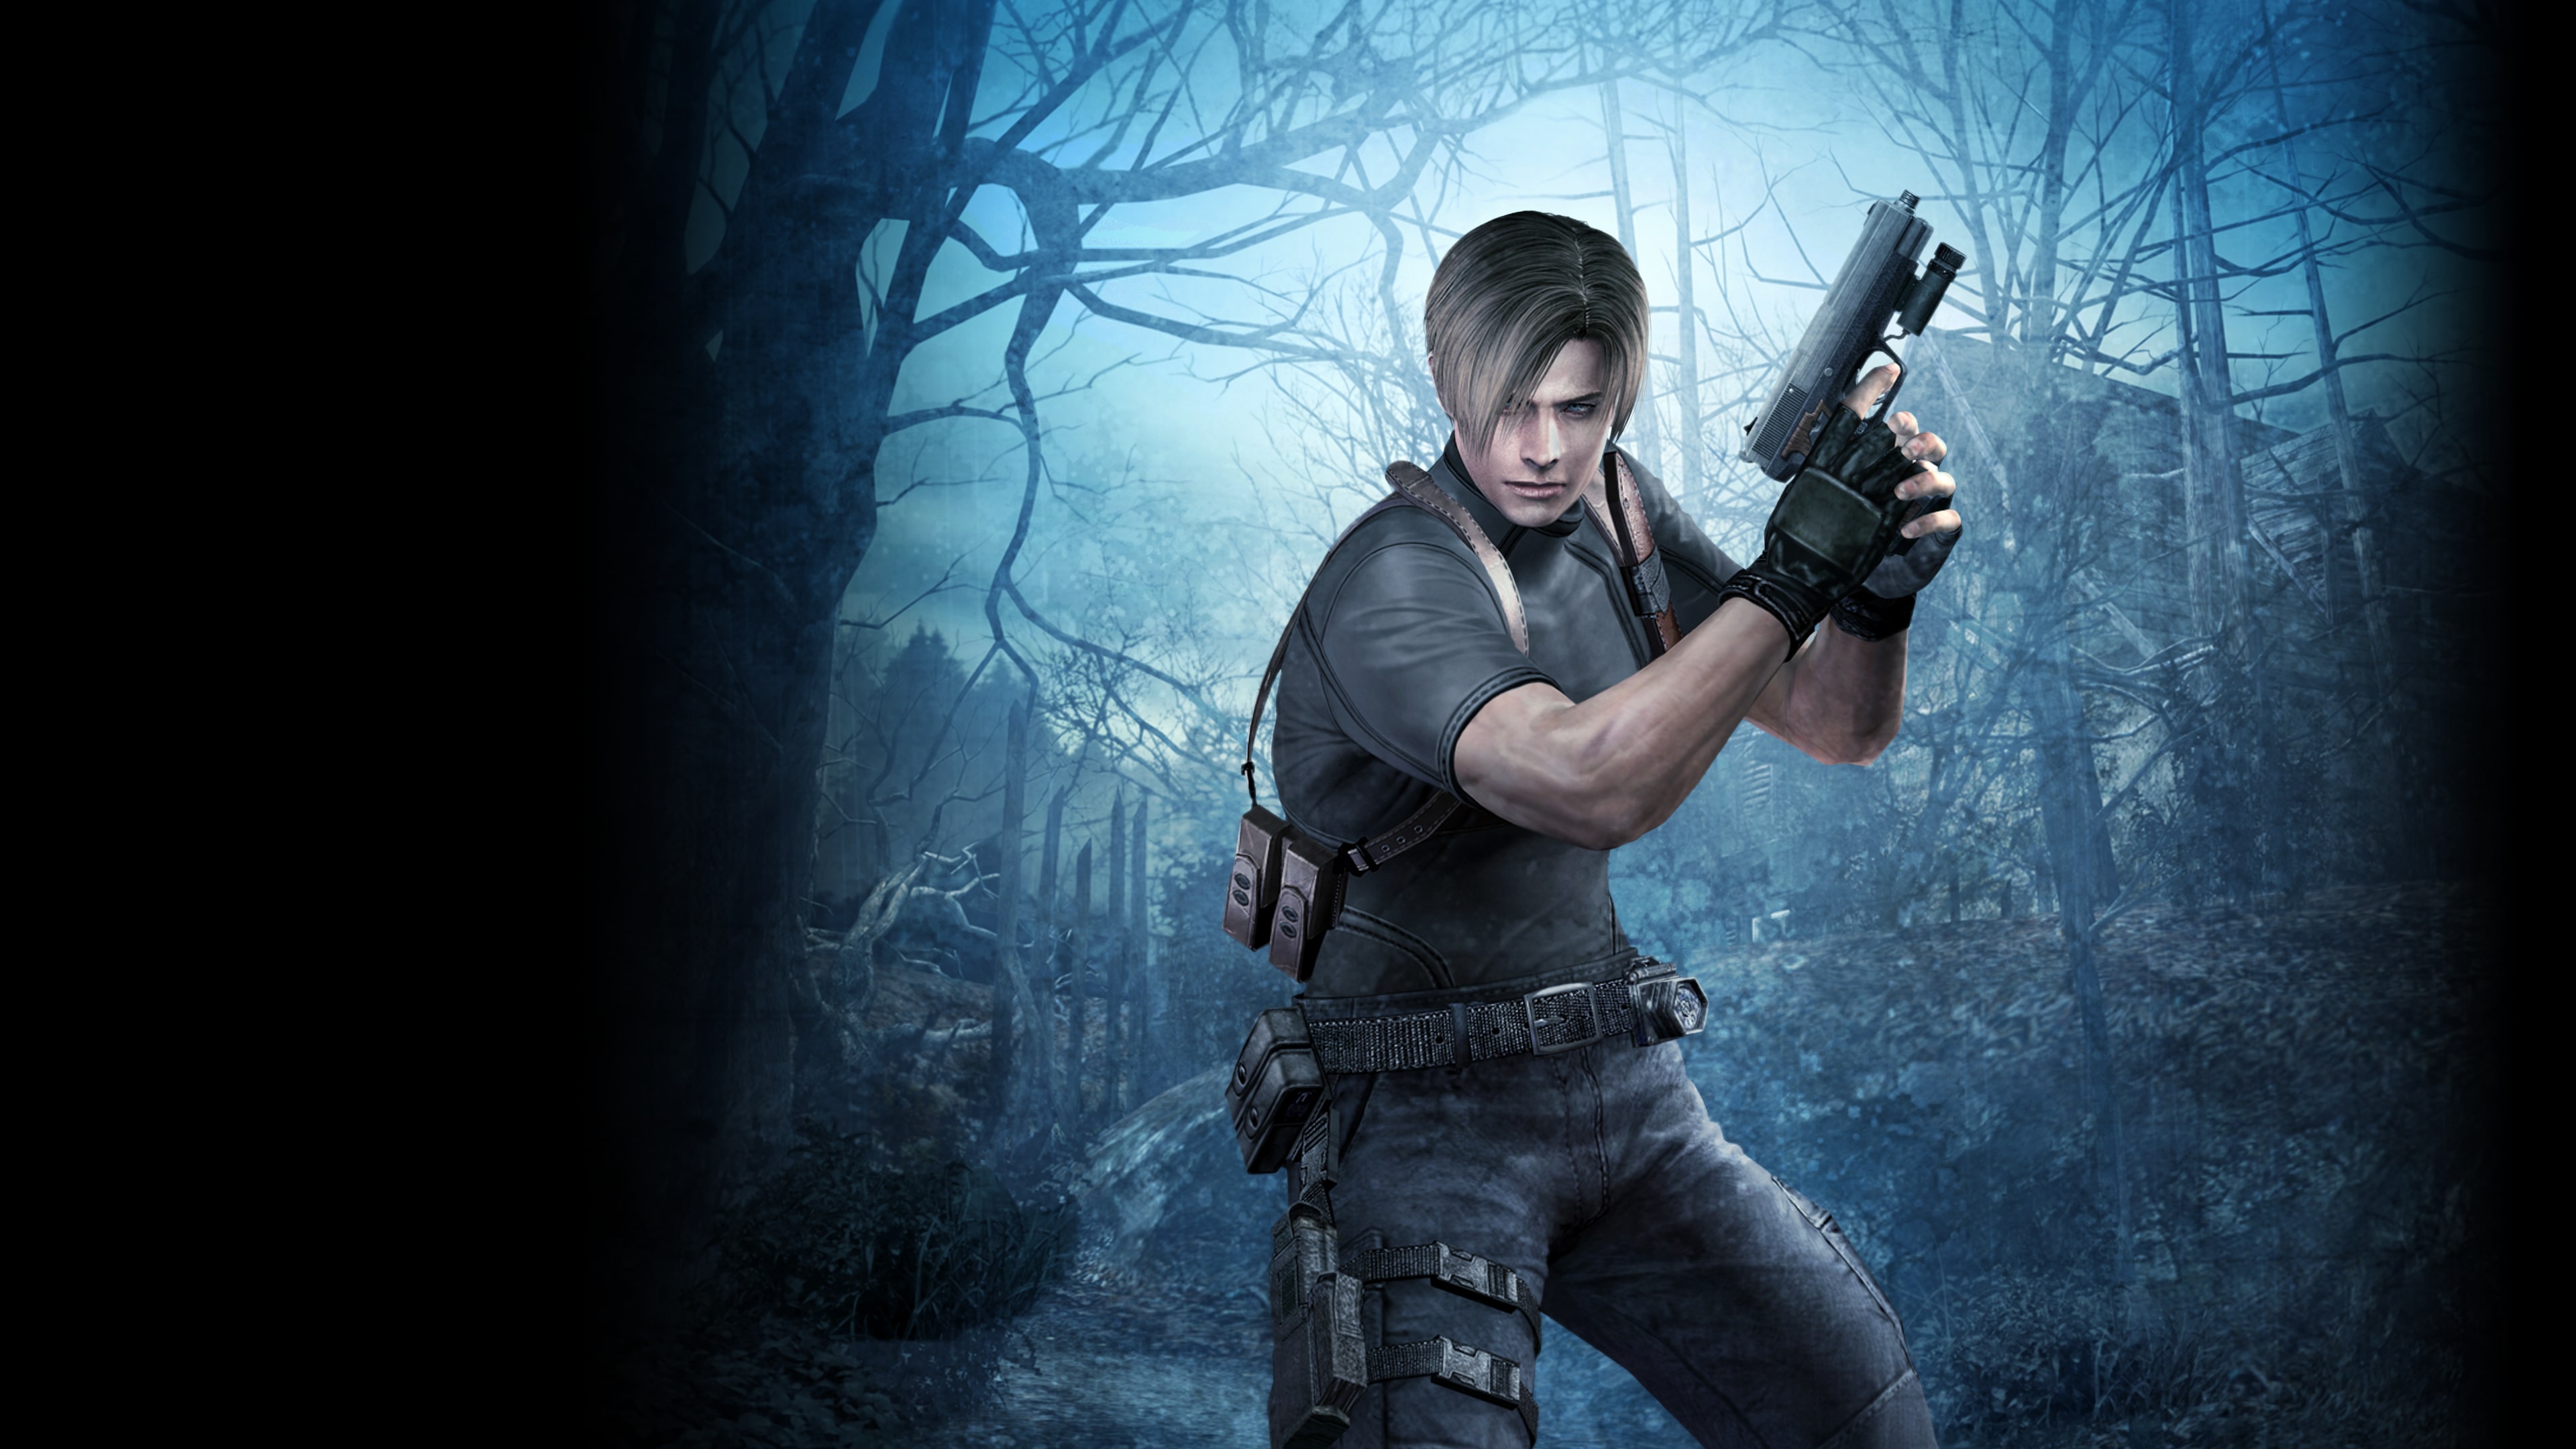 resident evil 4 (2005) (English/Chinese Ver.)